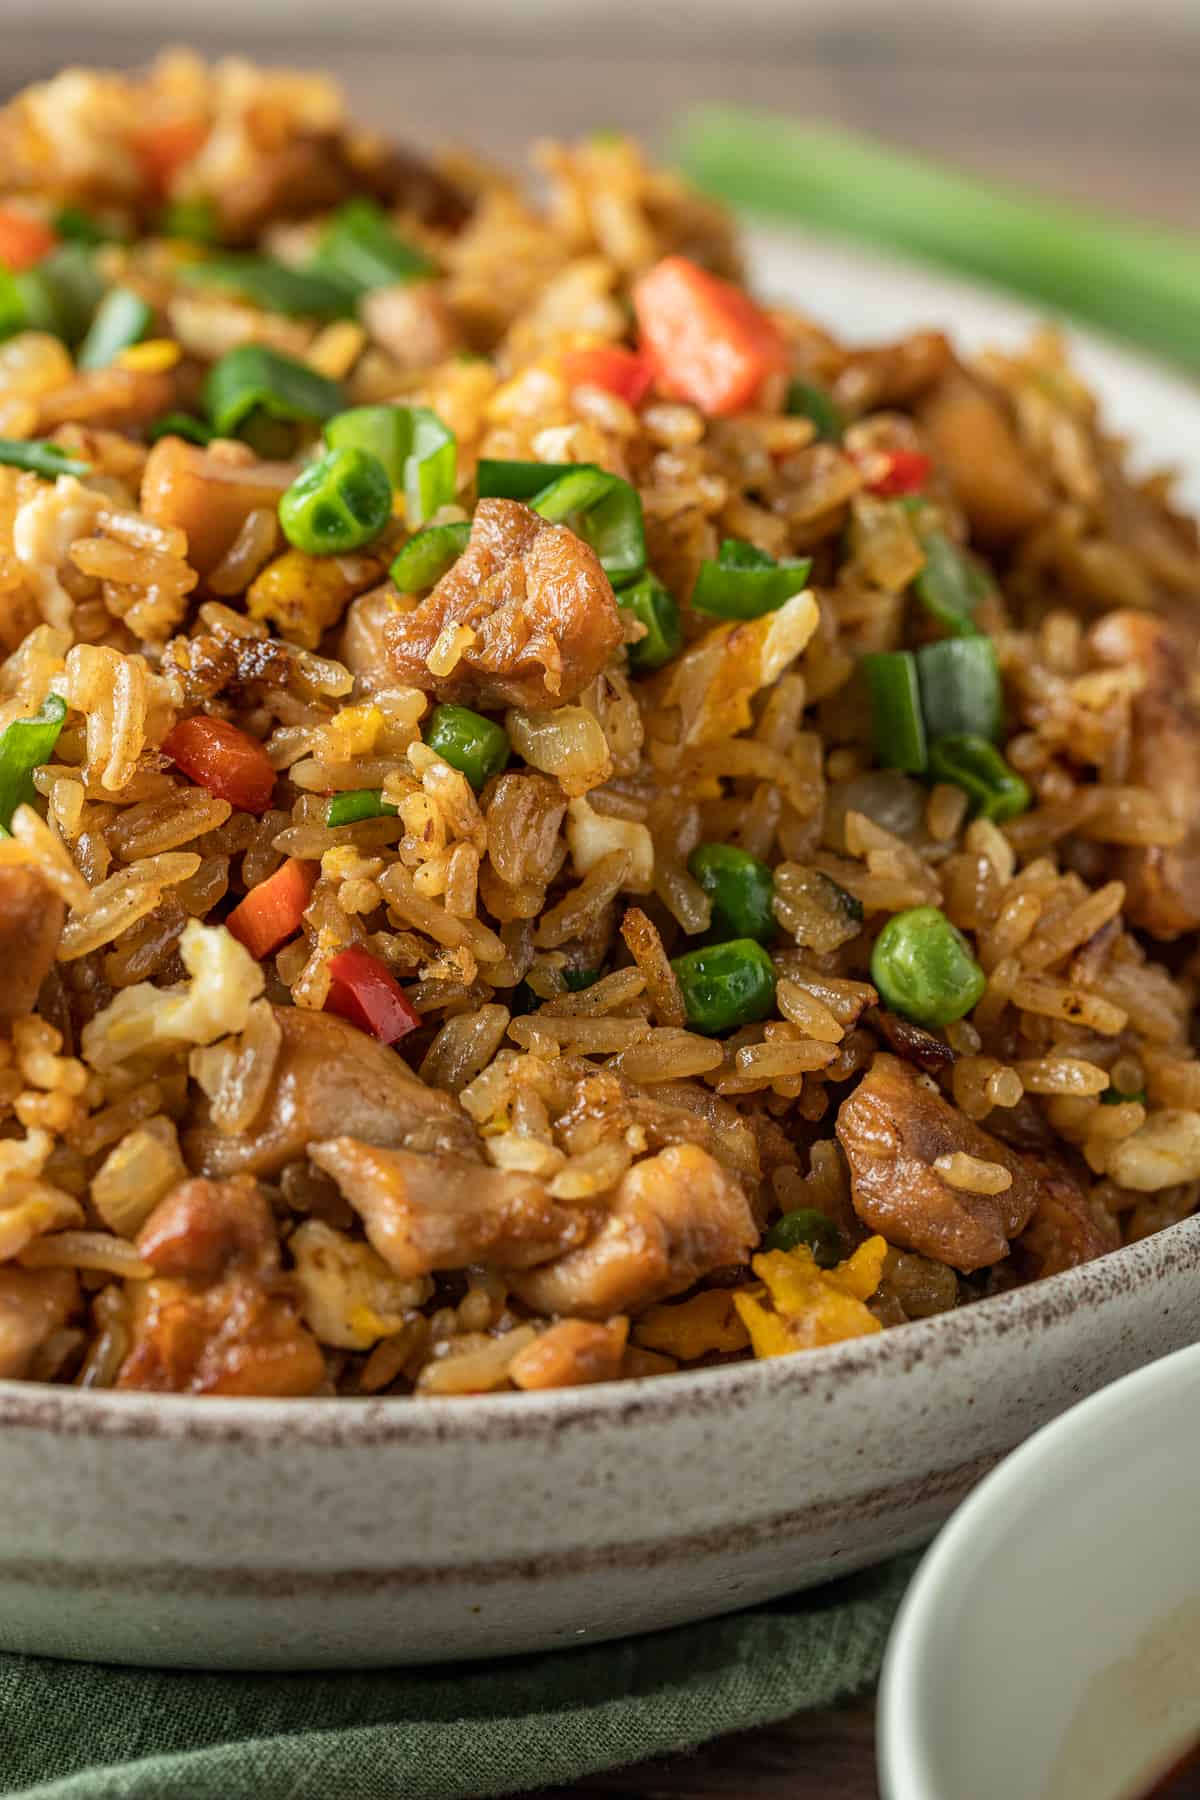 A close up view of a bowl of chicken fried rice